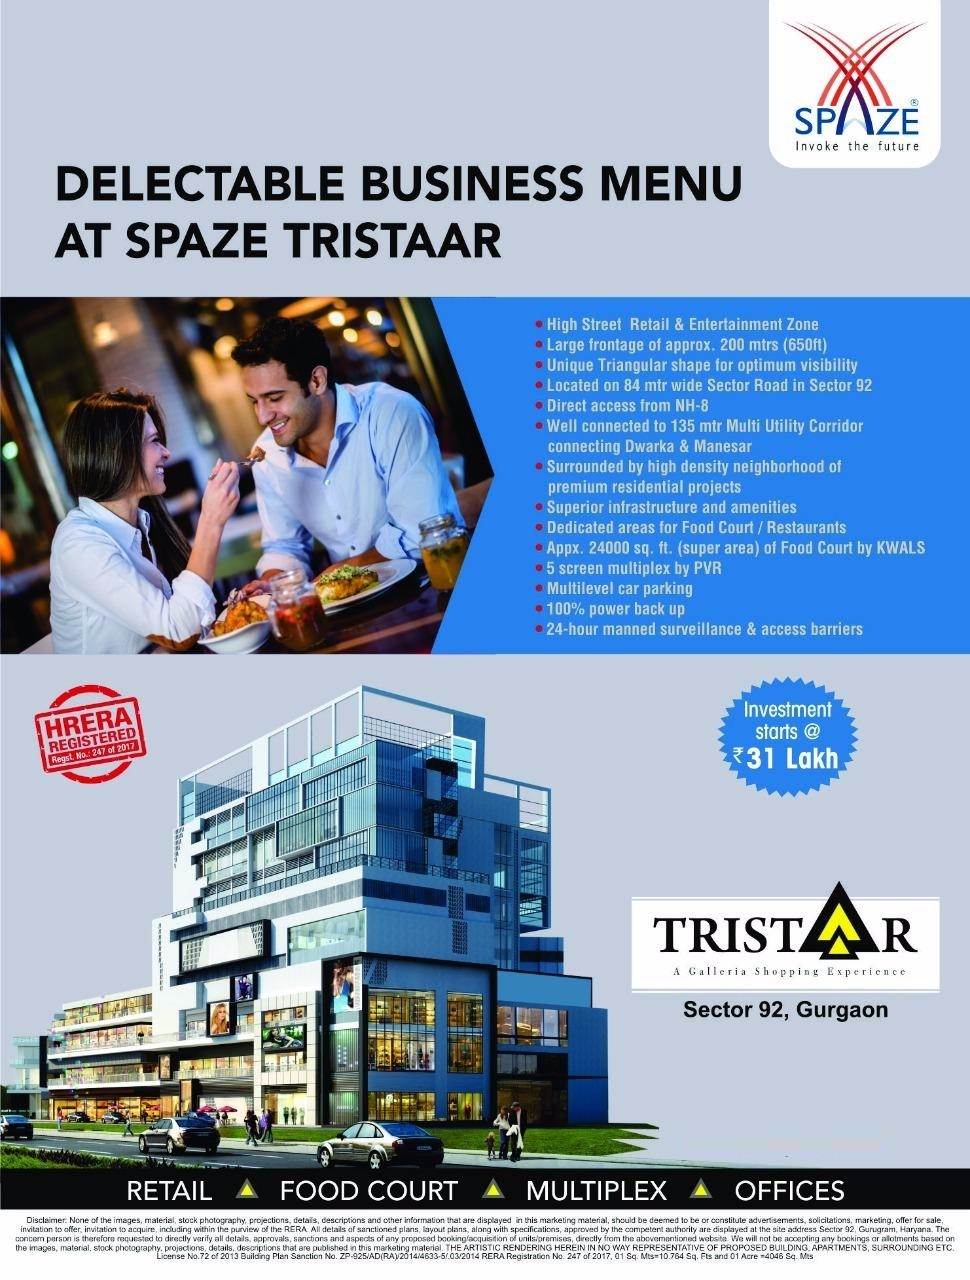 Experience a delectable business menu at Spaze Tristaar in Gurgaon Update